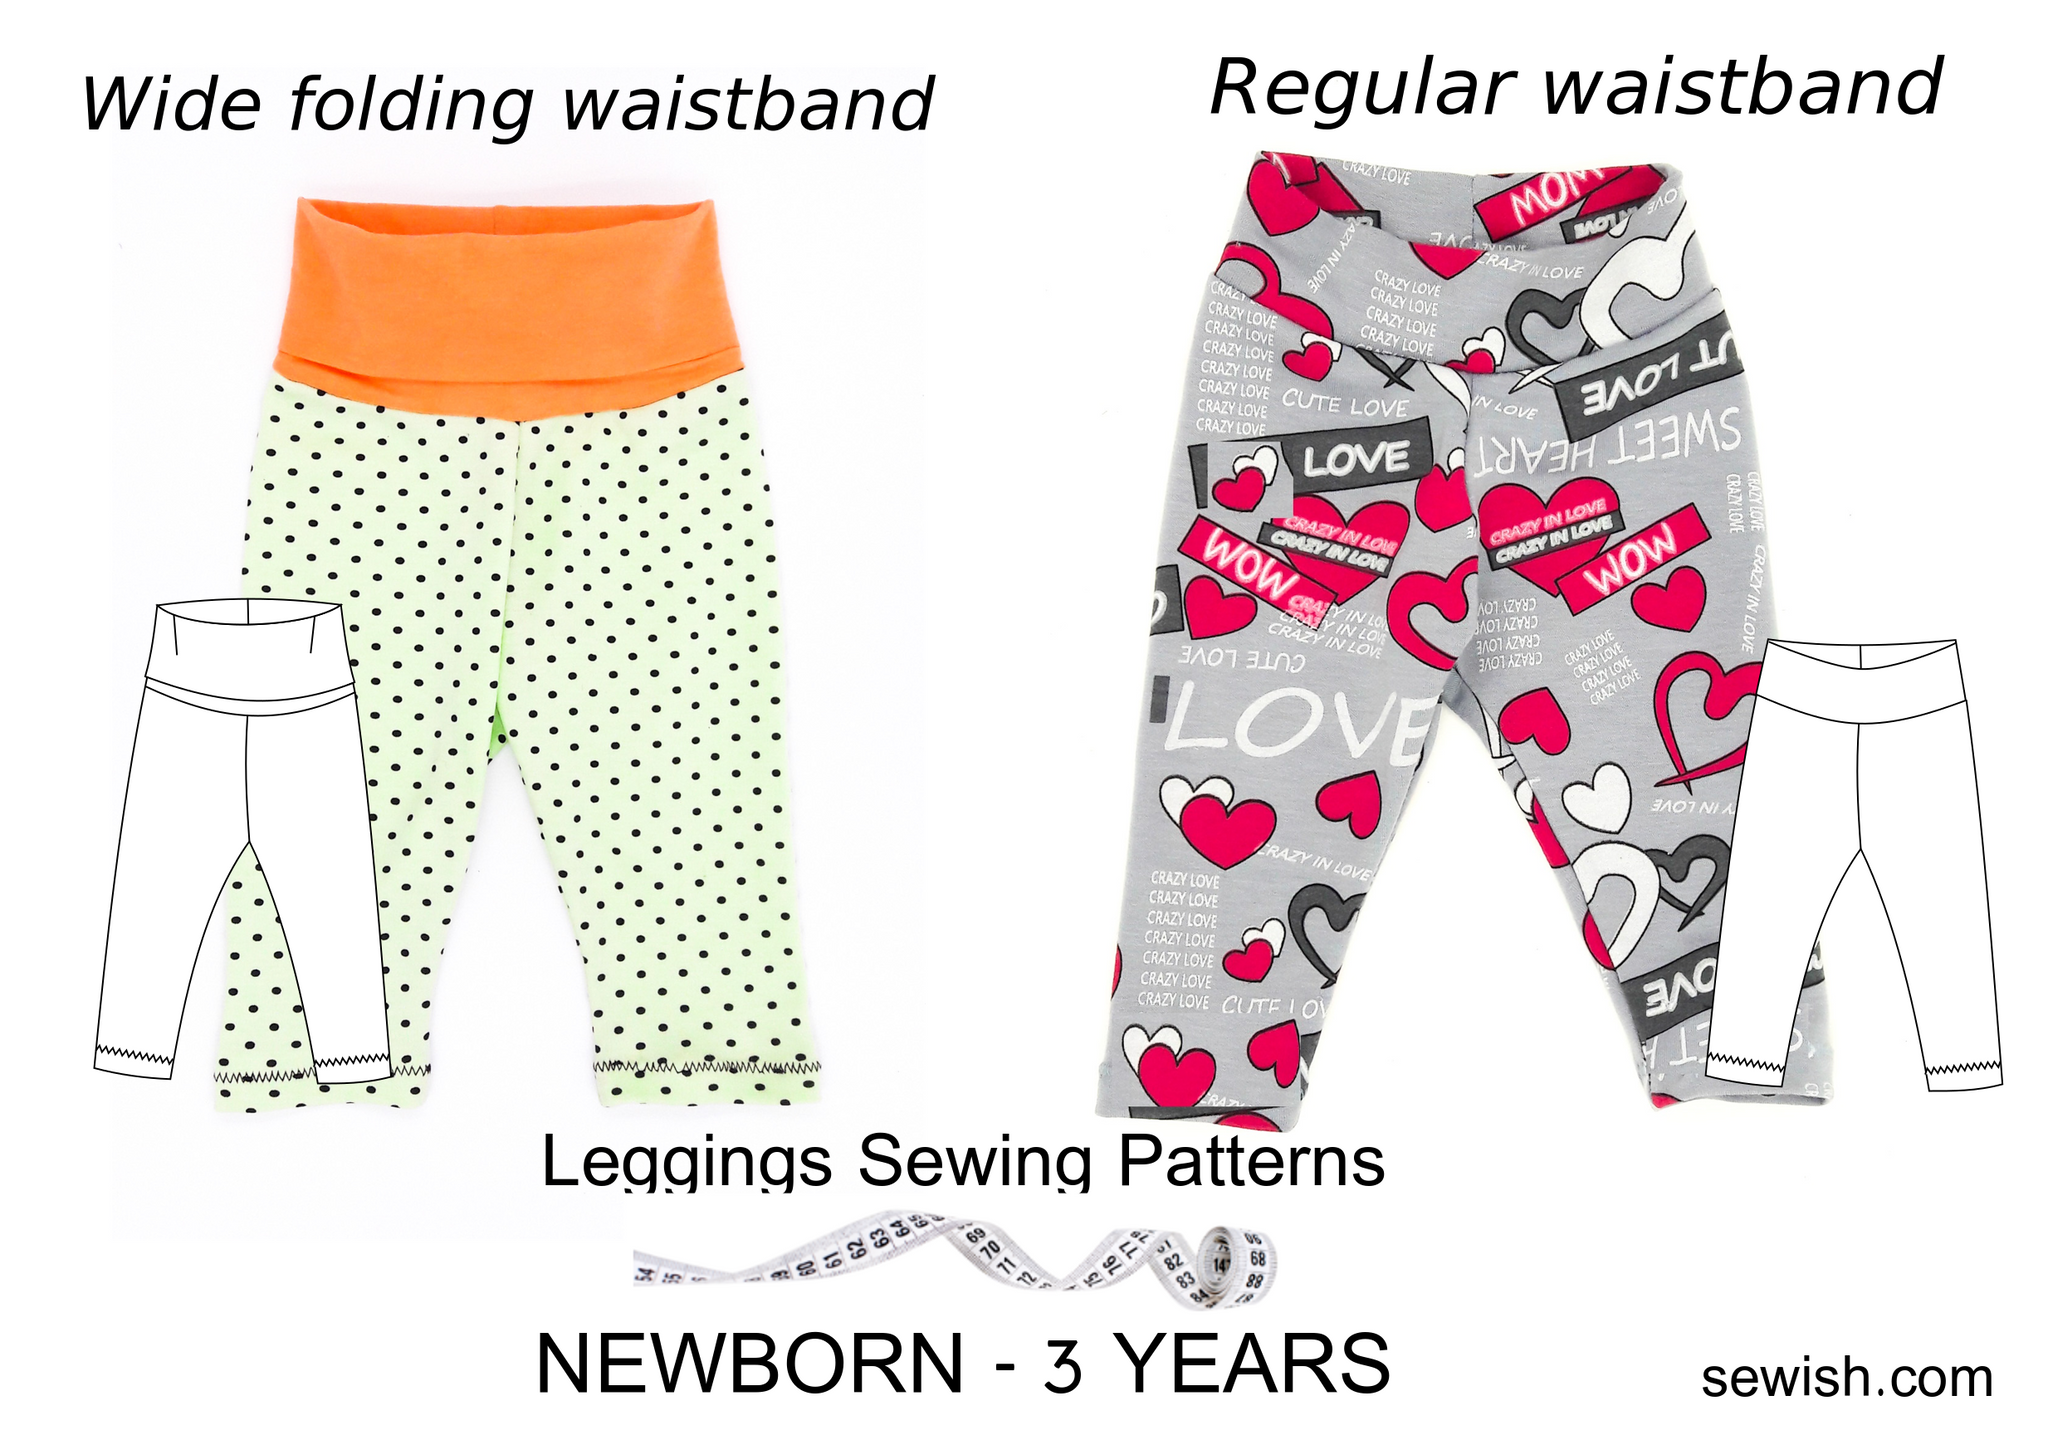 Leggings Baby Sewing Patterns for Girl and Boy Sizes NEWBORN - 3